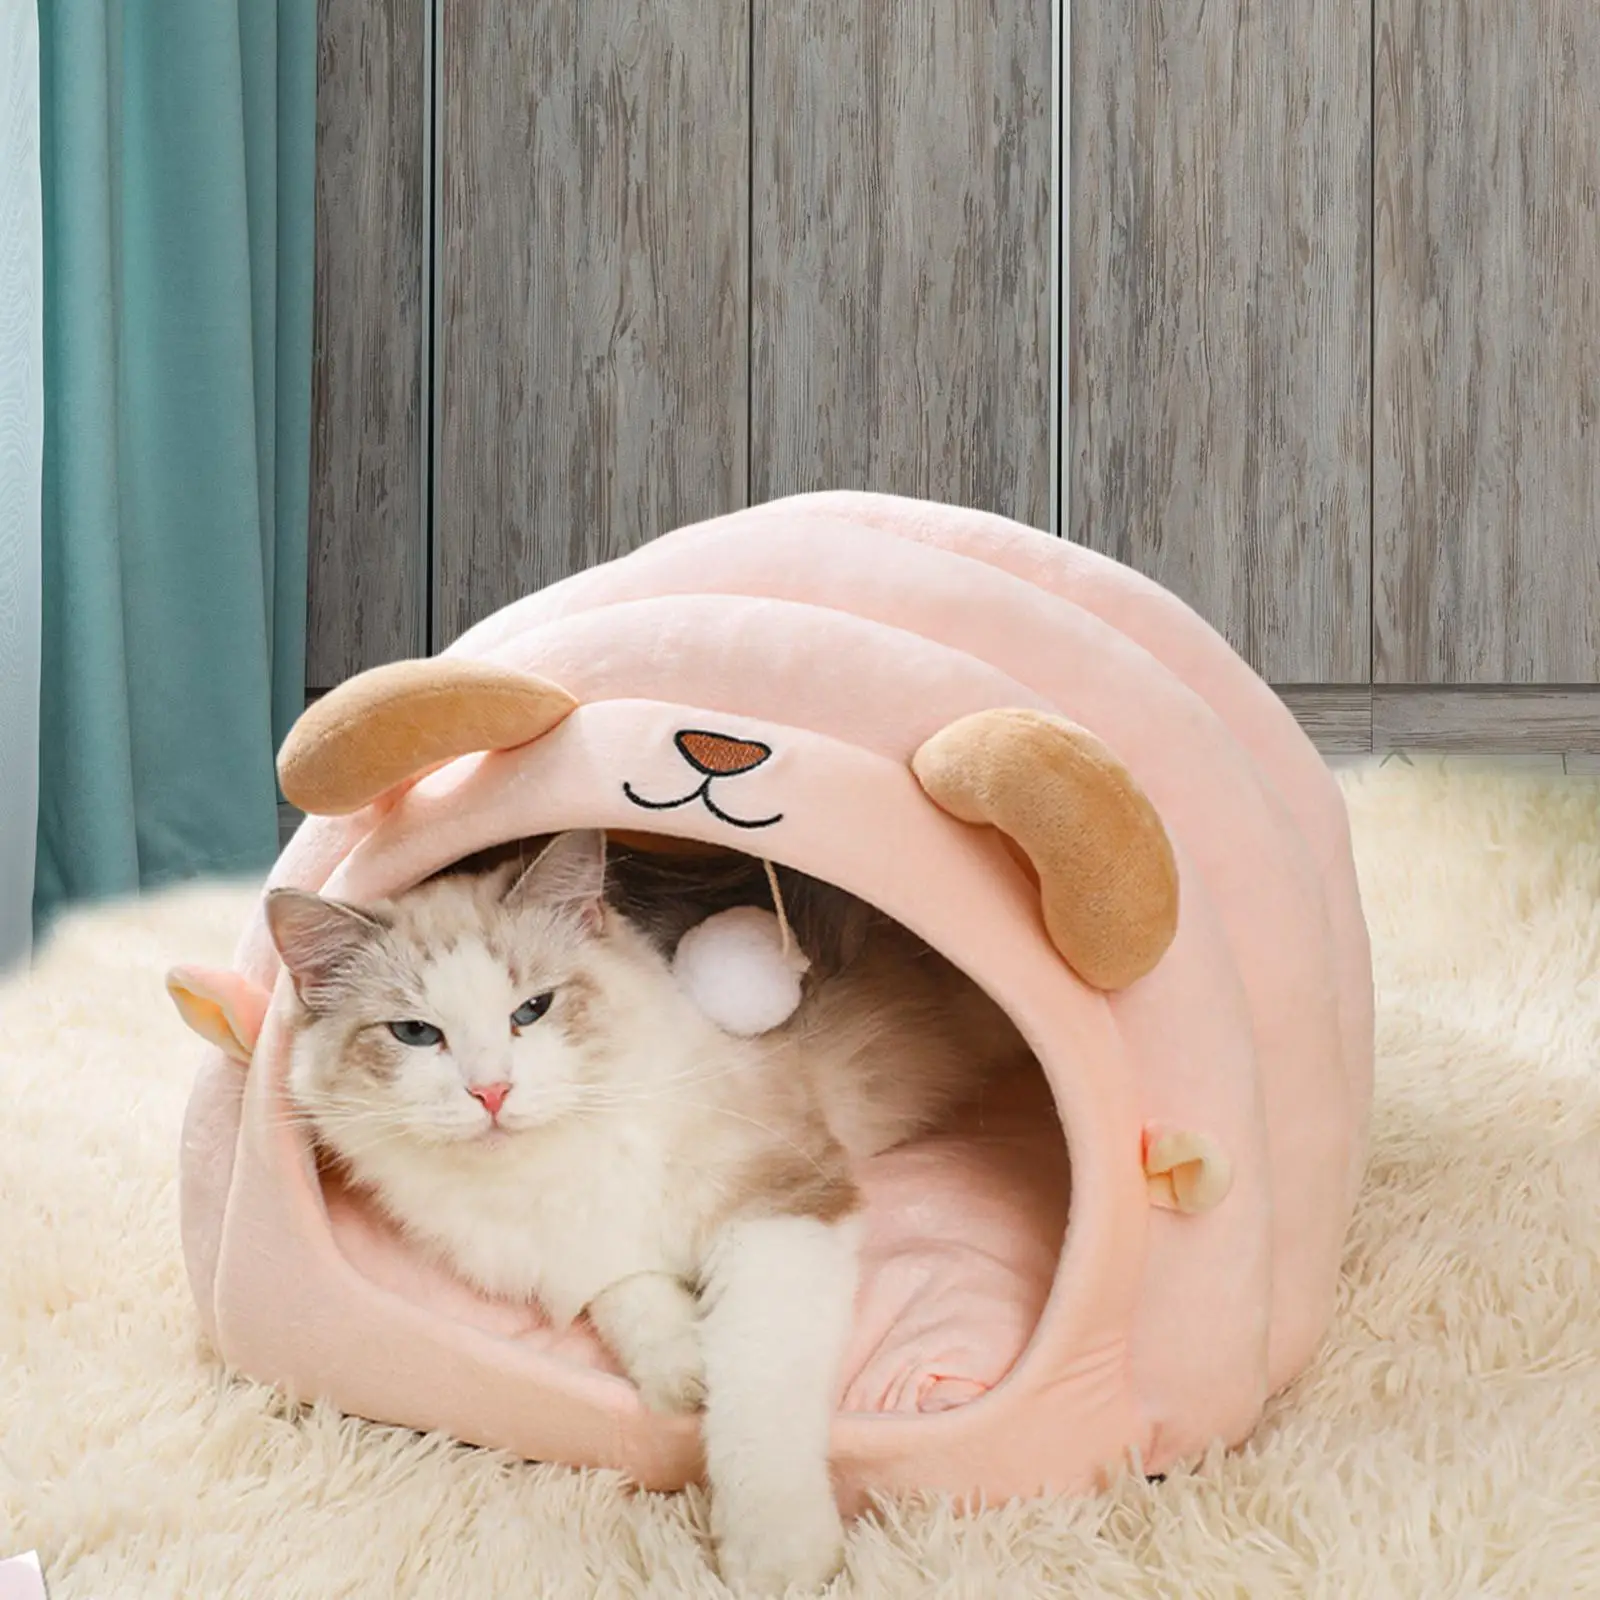 with Removable Mat Washable Cave House Small Animal Winter House for Kitty Kittens or Small Dogs Rabbits Indoor Outdoor